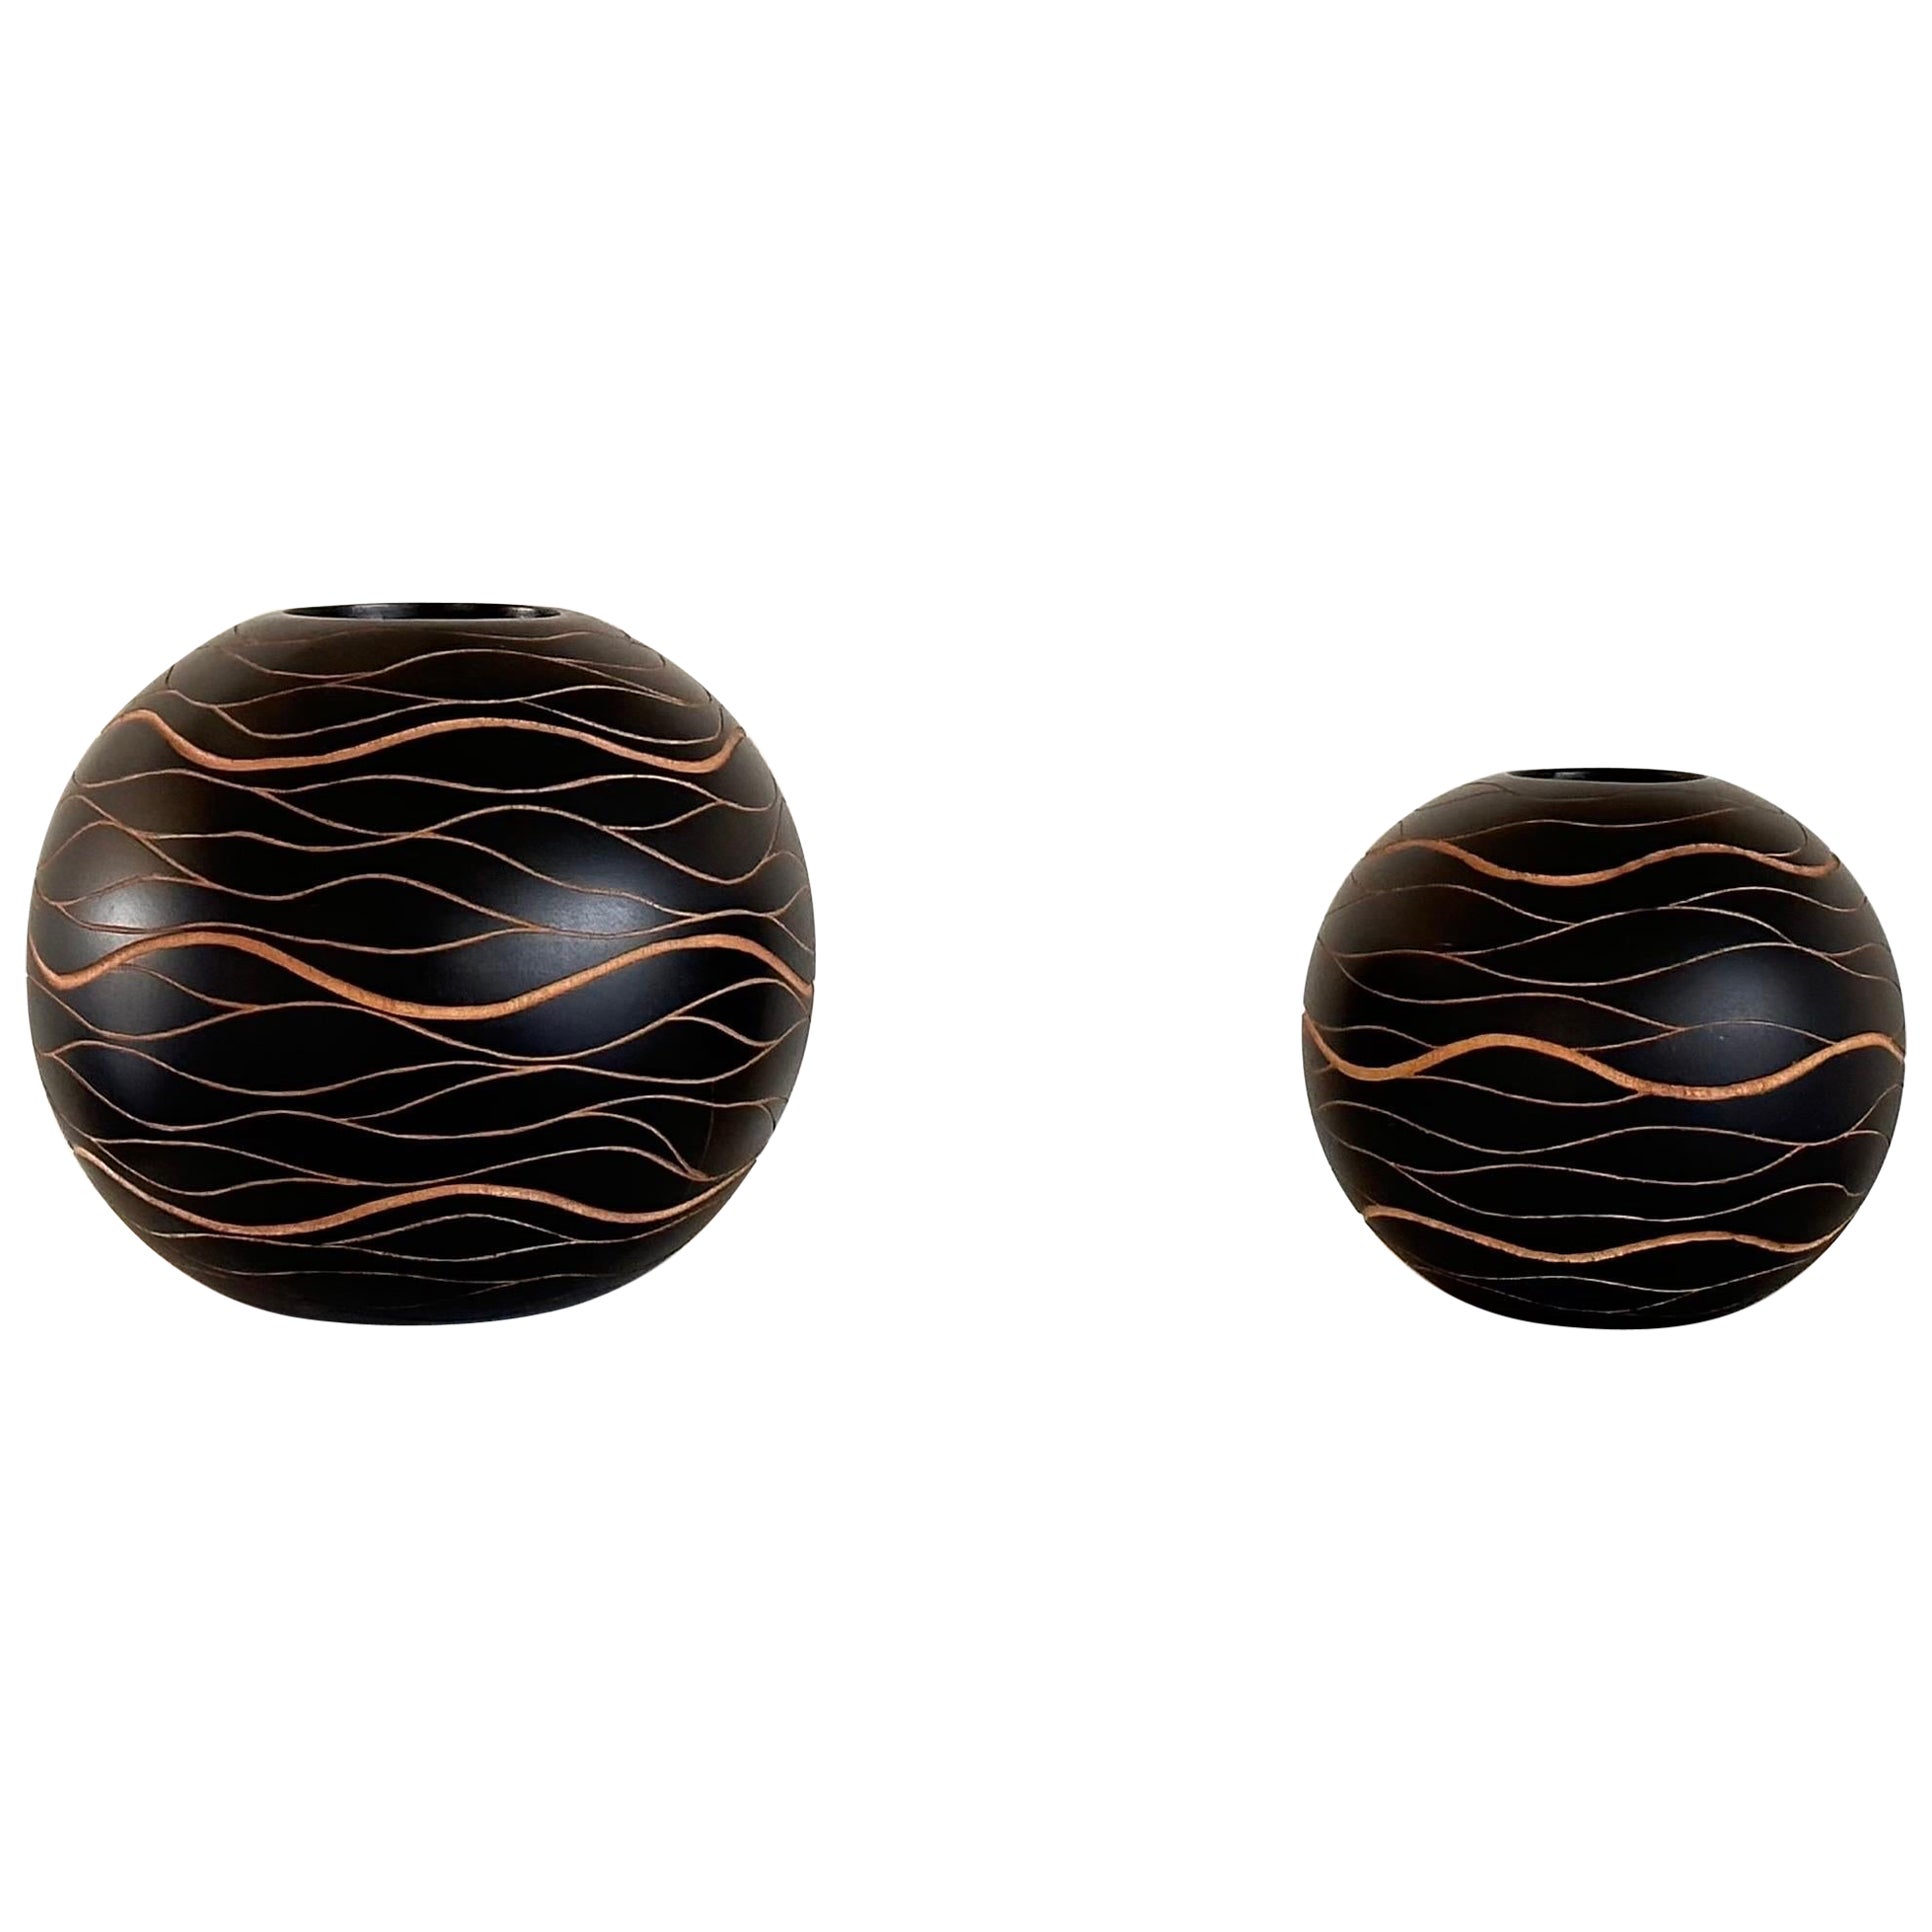 Italian Hand-Crafted Wooden Sphere Vases with Wavy Line Ornamentation, 1980s